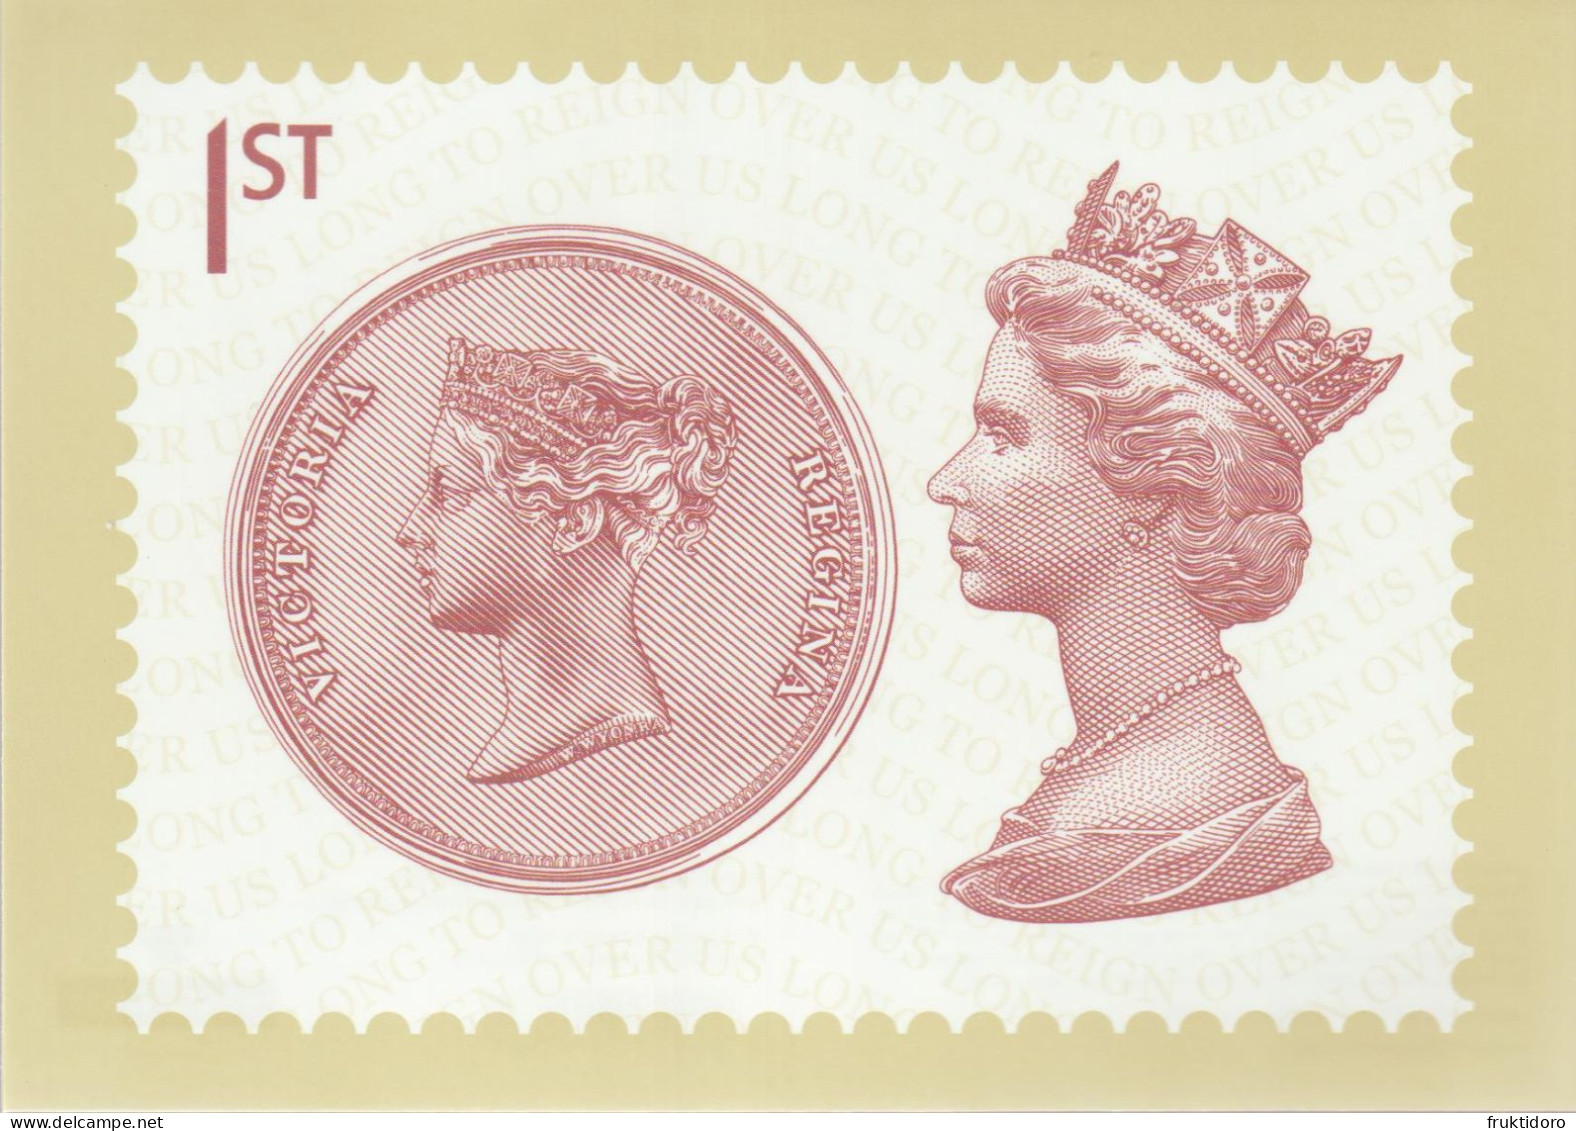 United Kingdom Postcards 2015 About Stamps In Mi Block 96 Queen Elizabeth II - Long To Reign Over Us ** - Collections